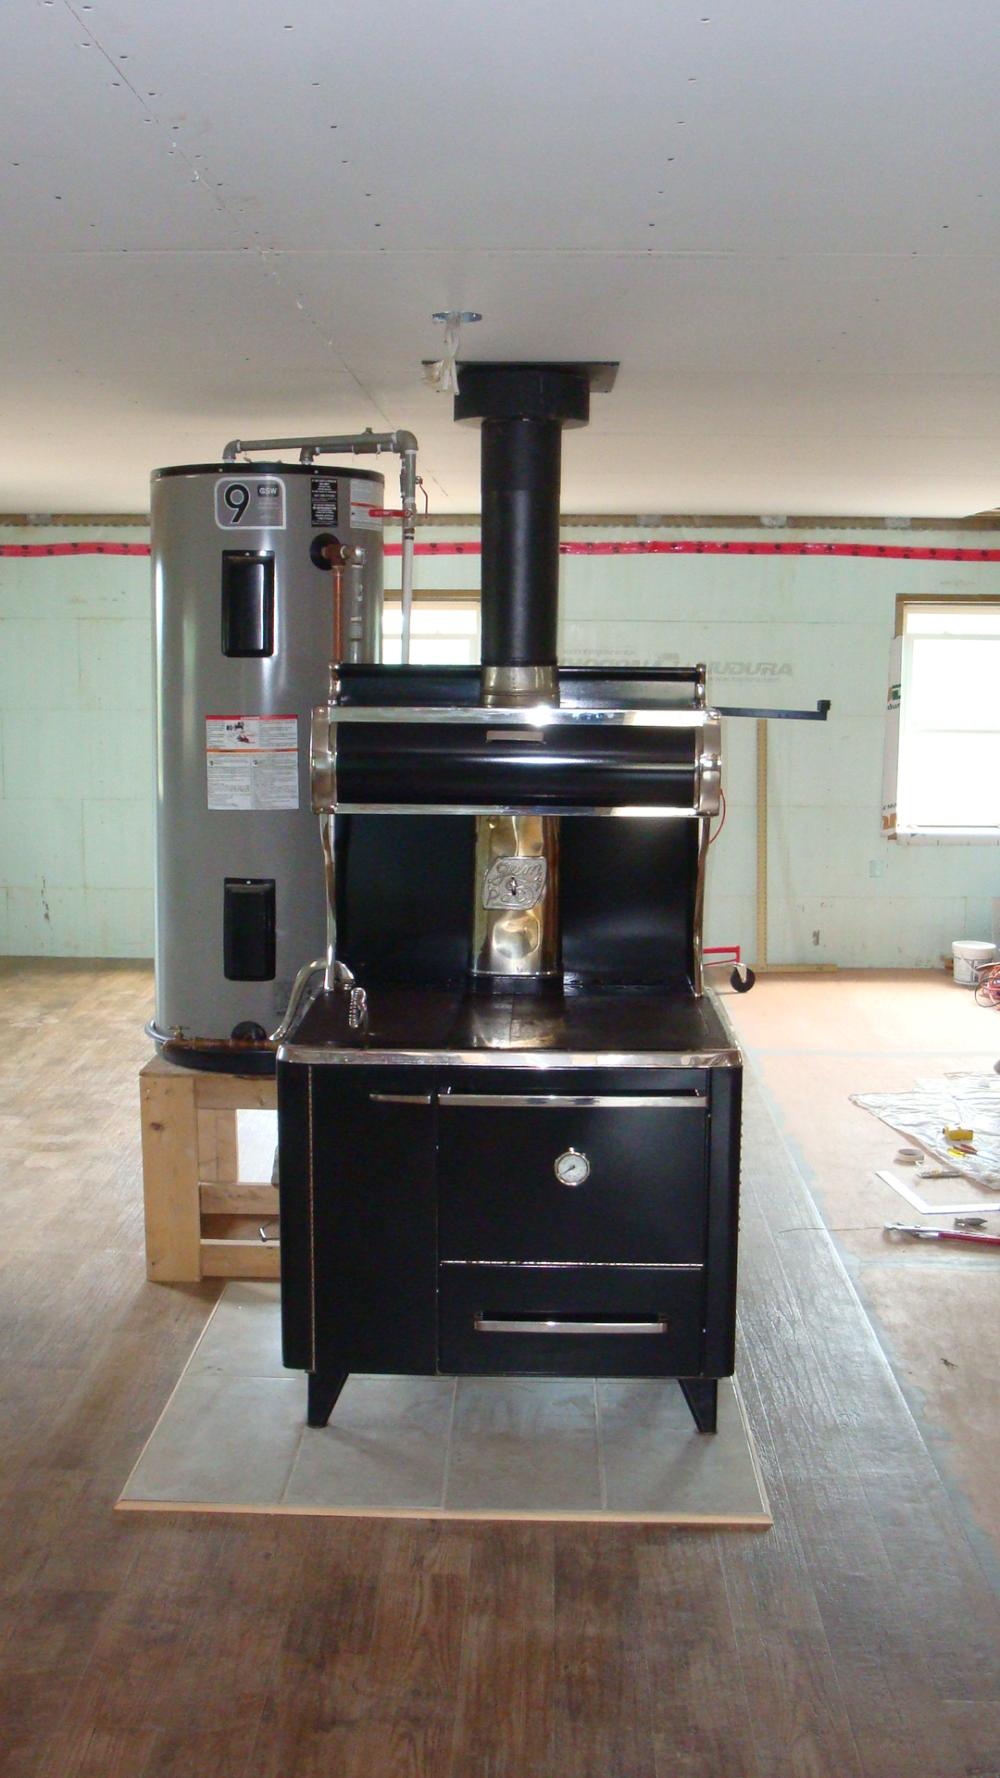 nova-scotia-stove-and-hot-water-tank-off-grid-and-free-my-path-to